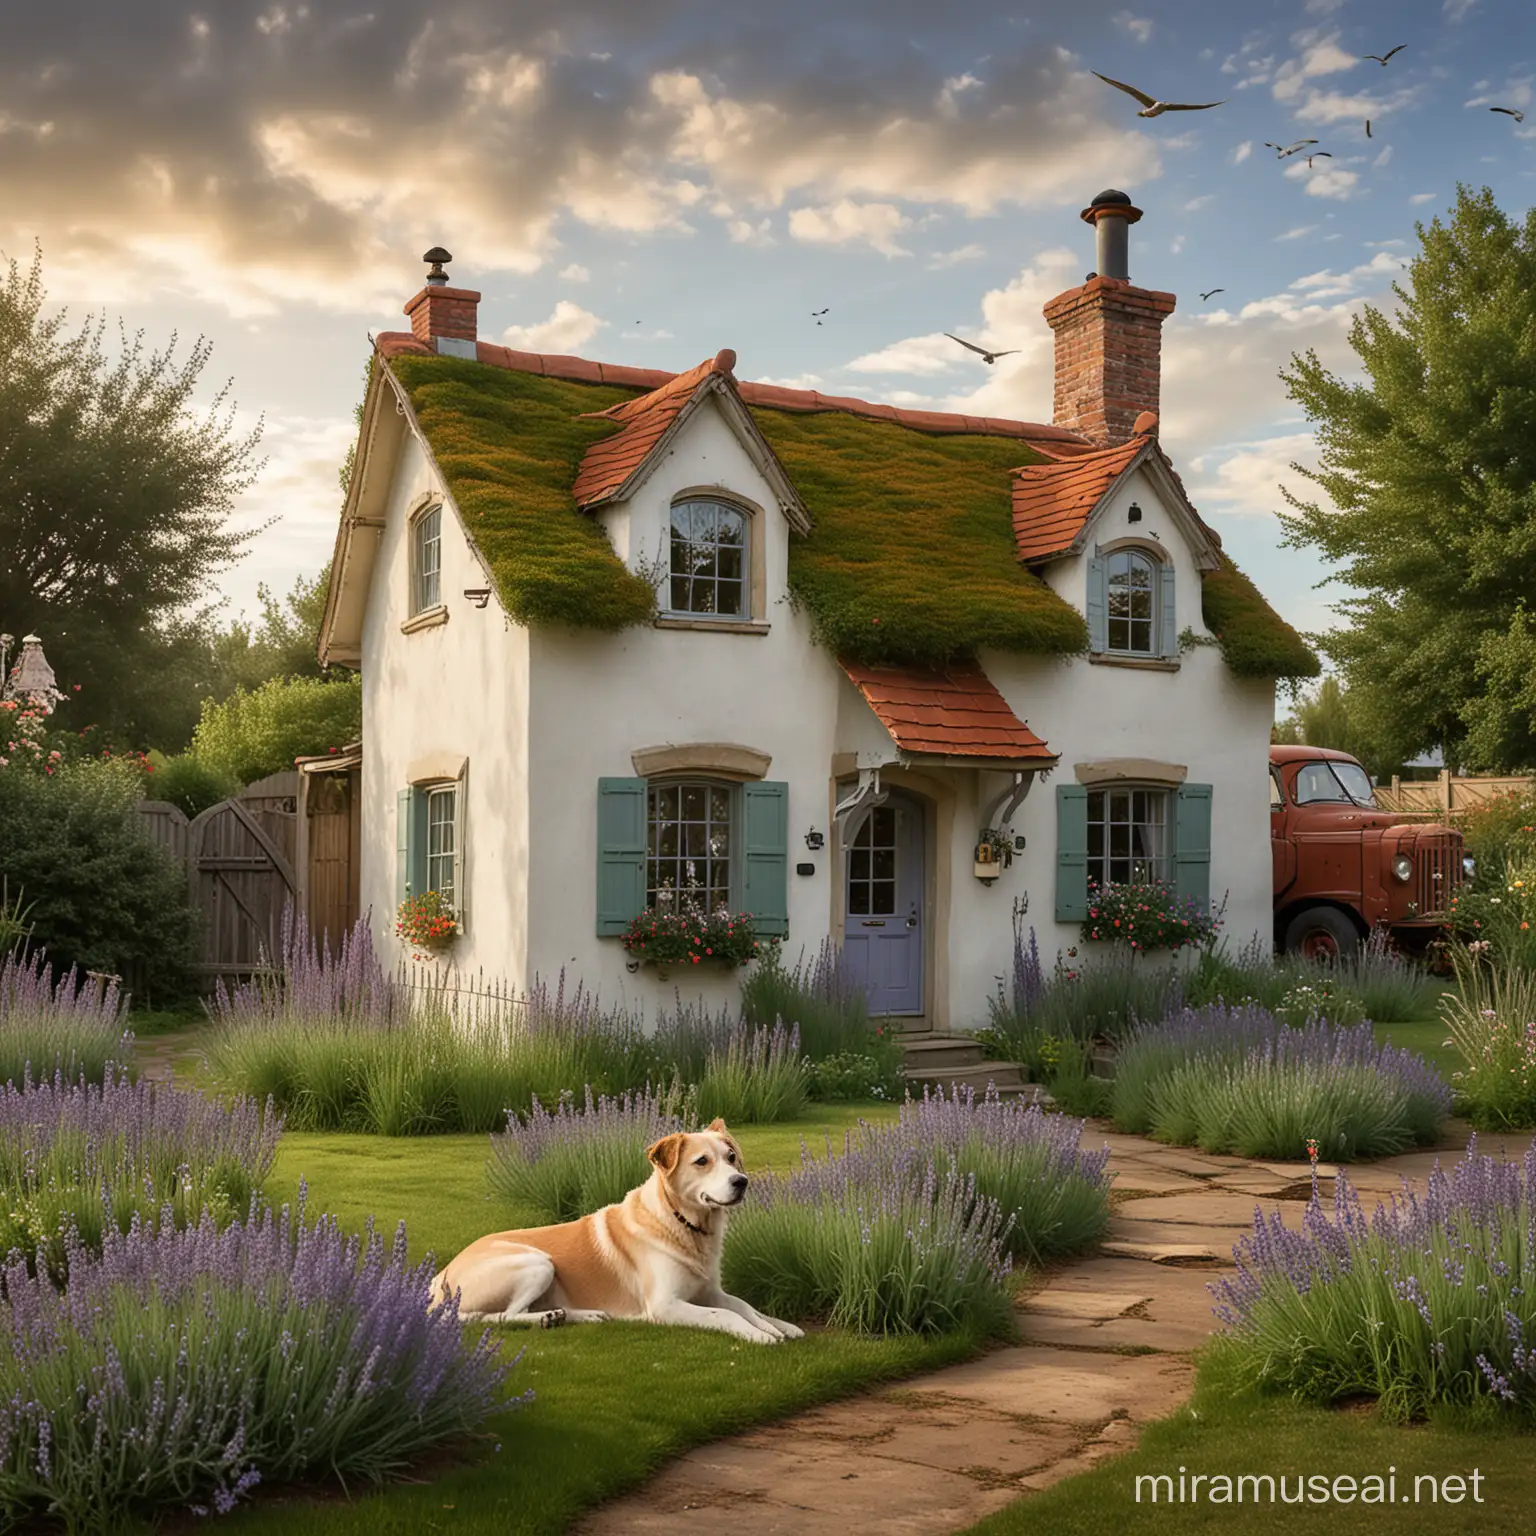 A quaint, storybook cottage with a whimsical, crooked design and a green roof, complete with a tall chimney, nestled in a small, vibrant garden off to the side of a quaint little yard. In the garden, there's a modest patch of lavender, adding a splash of color and a soothing scent. A classic, rusty pickup truck is parked nearby, hinting at tales of past adventures. A scruffy, loyal dog lounges in the yard, watching the world go by. The backdrop features a big, atmospheric sky with scattered clouds and a few seagulls in flight, creating a serene, picturesque setting. The image captures the essence of a cozy, lived-in space, inviting and full of stories, rendered in textured, painterly strokes reminiscent of Monet.